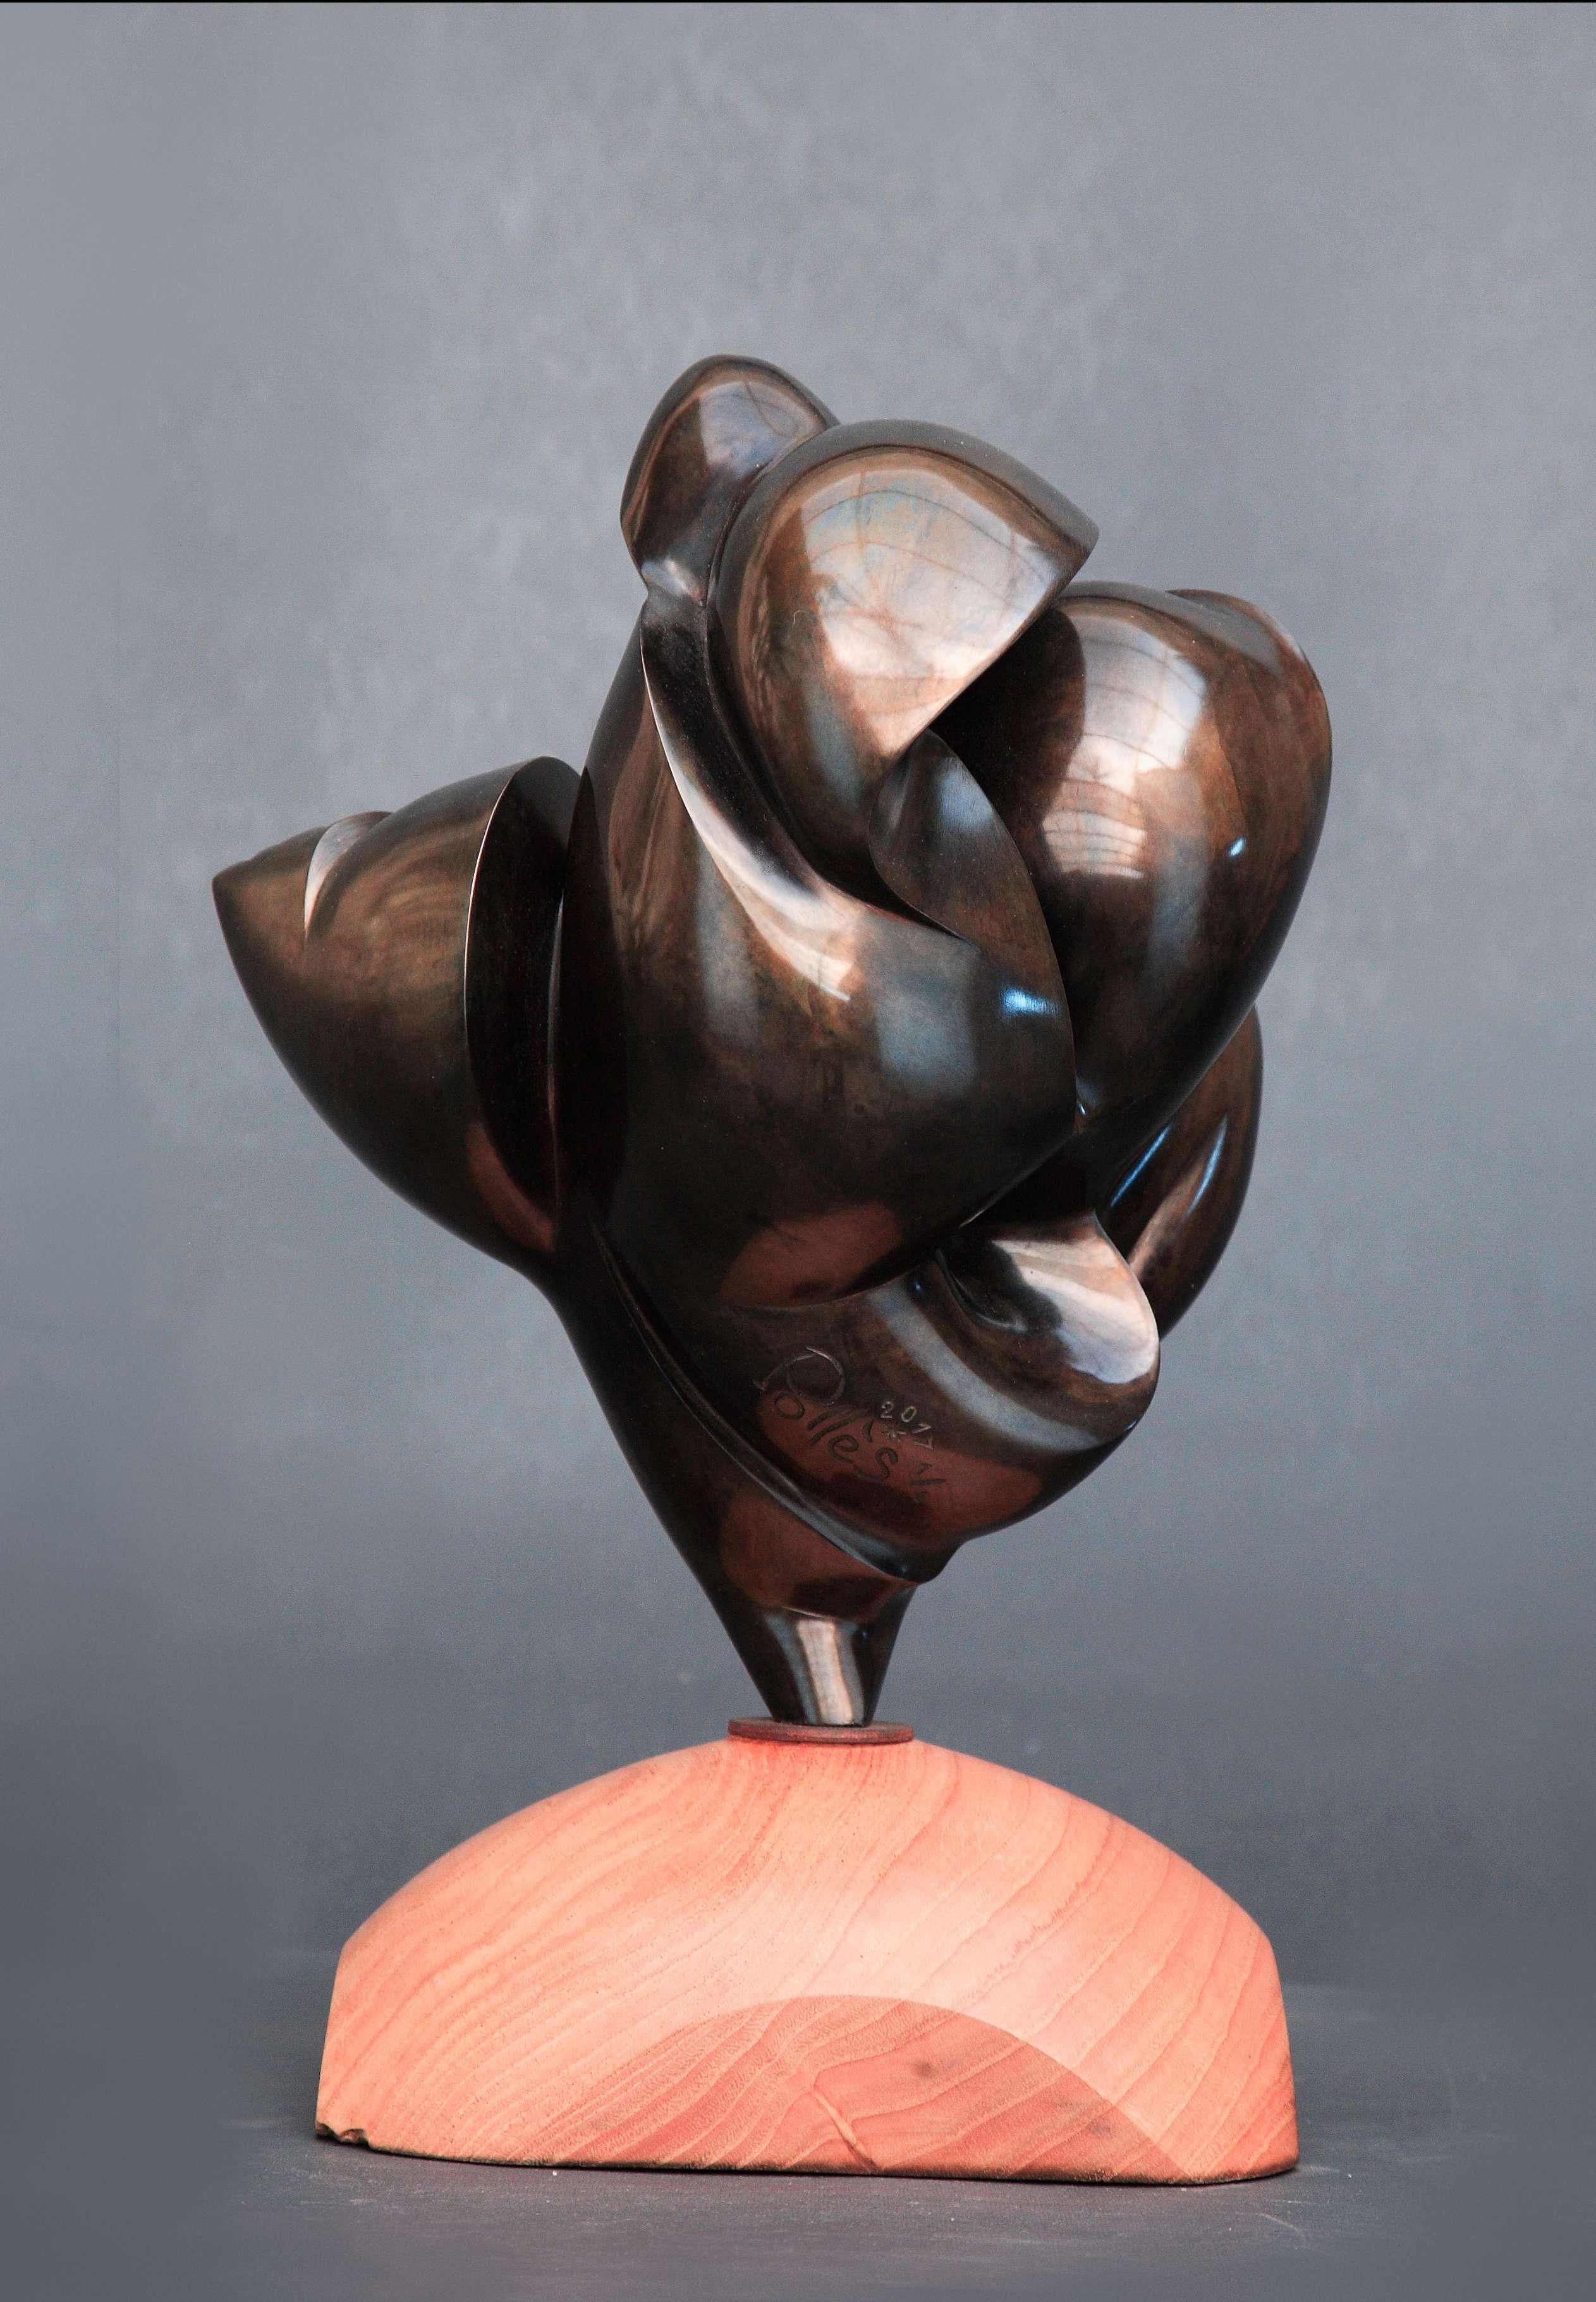 Pollès - Bronze Sculpture - Thelxinoé
Bronze
Edition: 1/4
2016
Dimensions: 28 x 21 x 20 cm
Signed and Numbered

BIOGRAPHY
Pollès was born in Paris in 1945
Like Leonard de Vinci in an anatomical search of perfection, of representation of